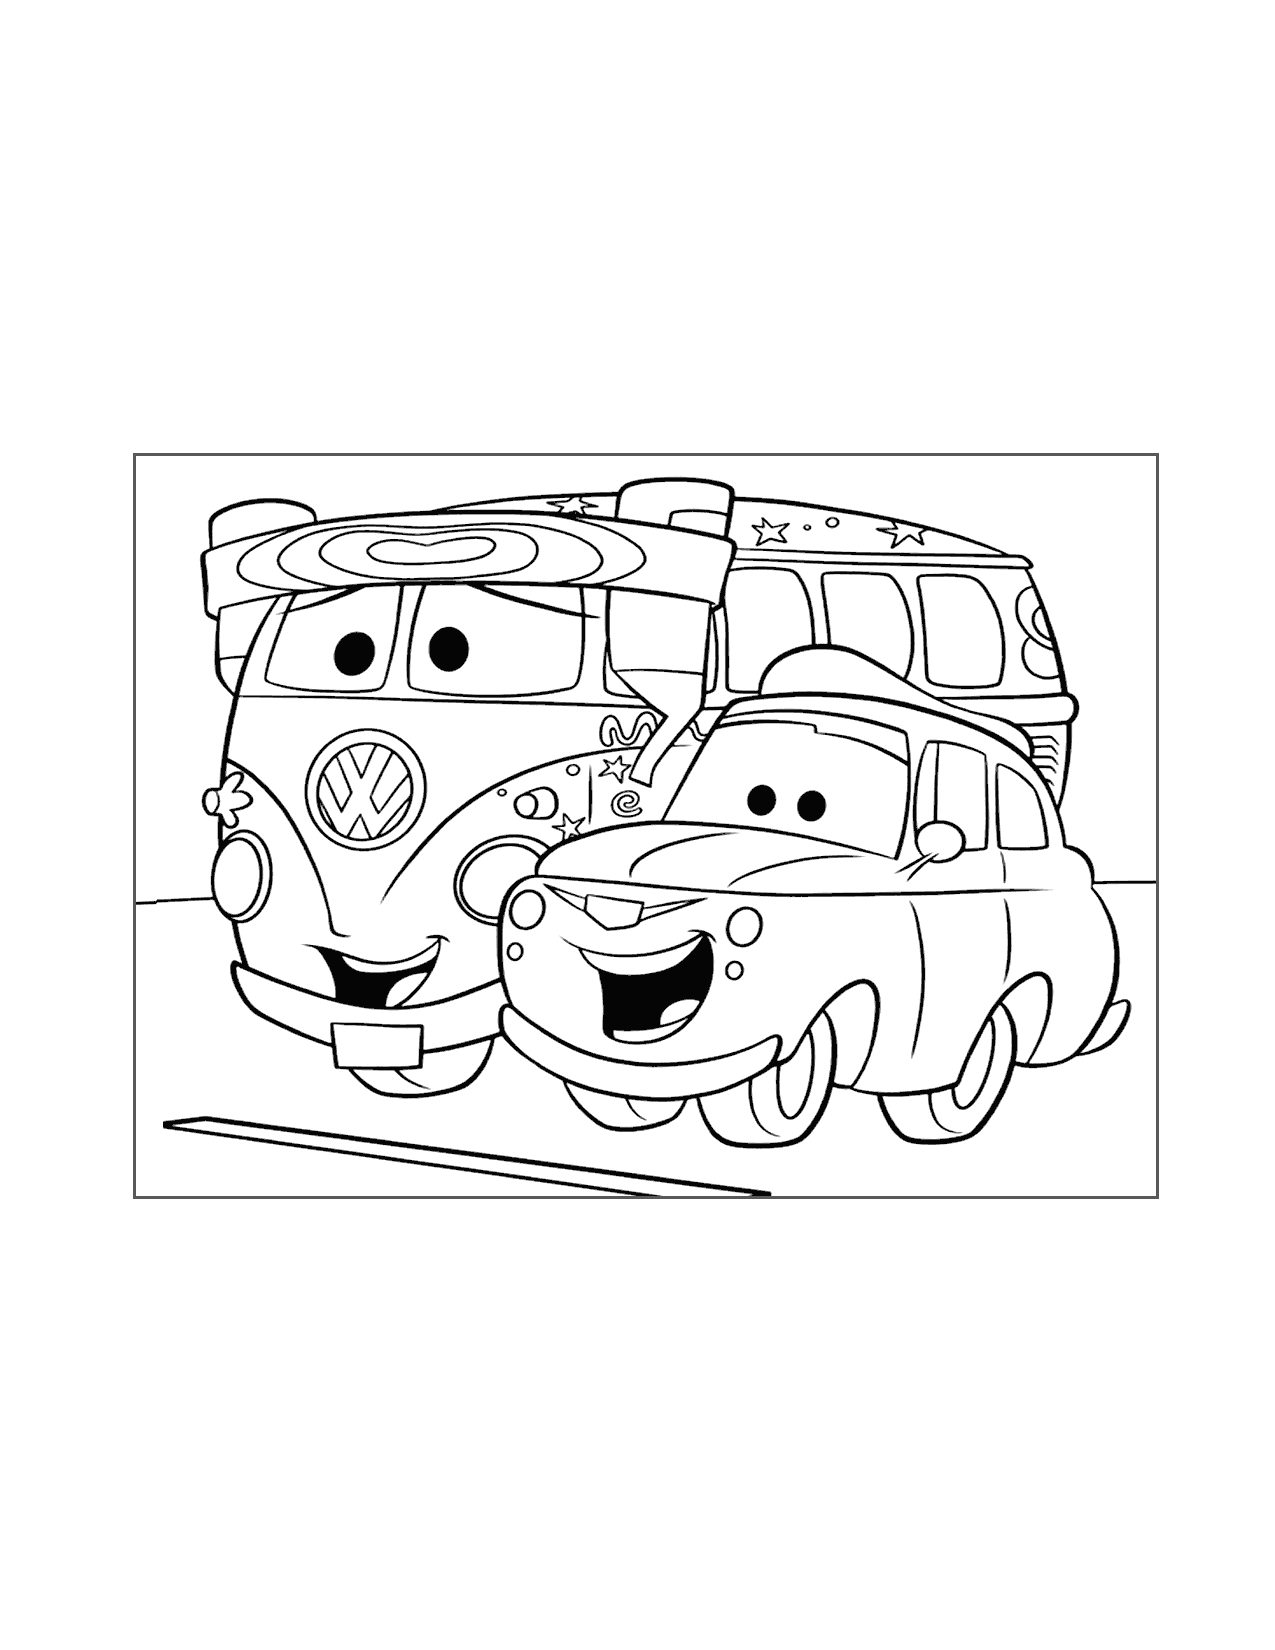 Fillmore Cars Coloring Page